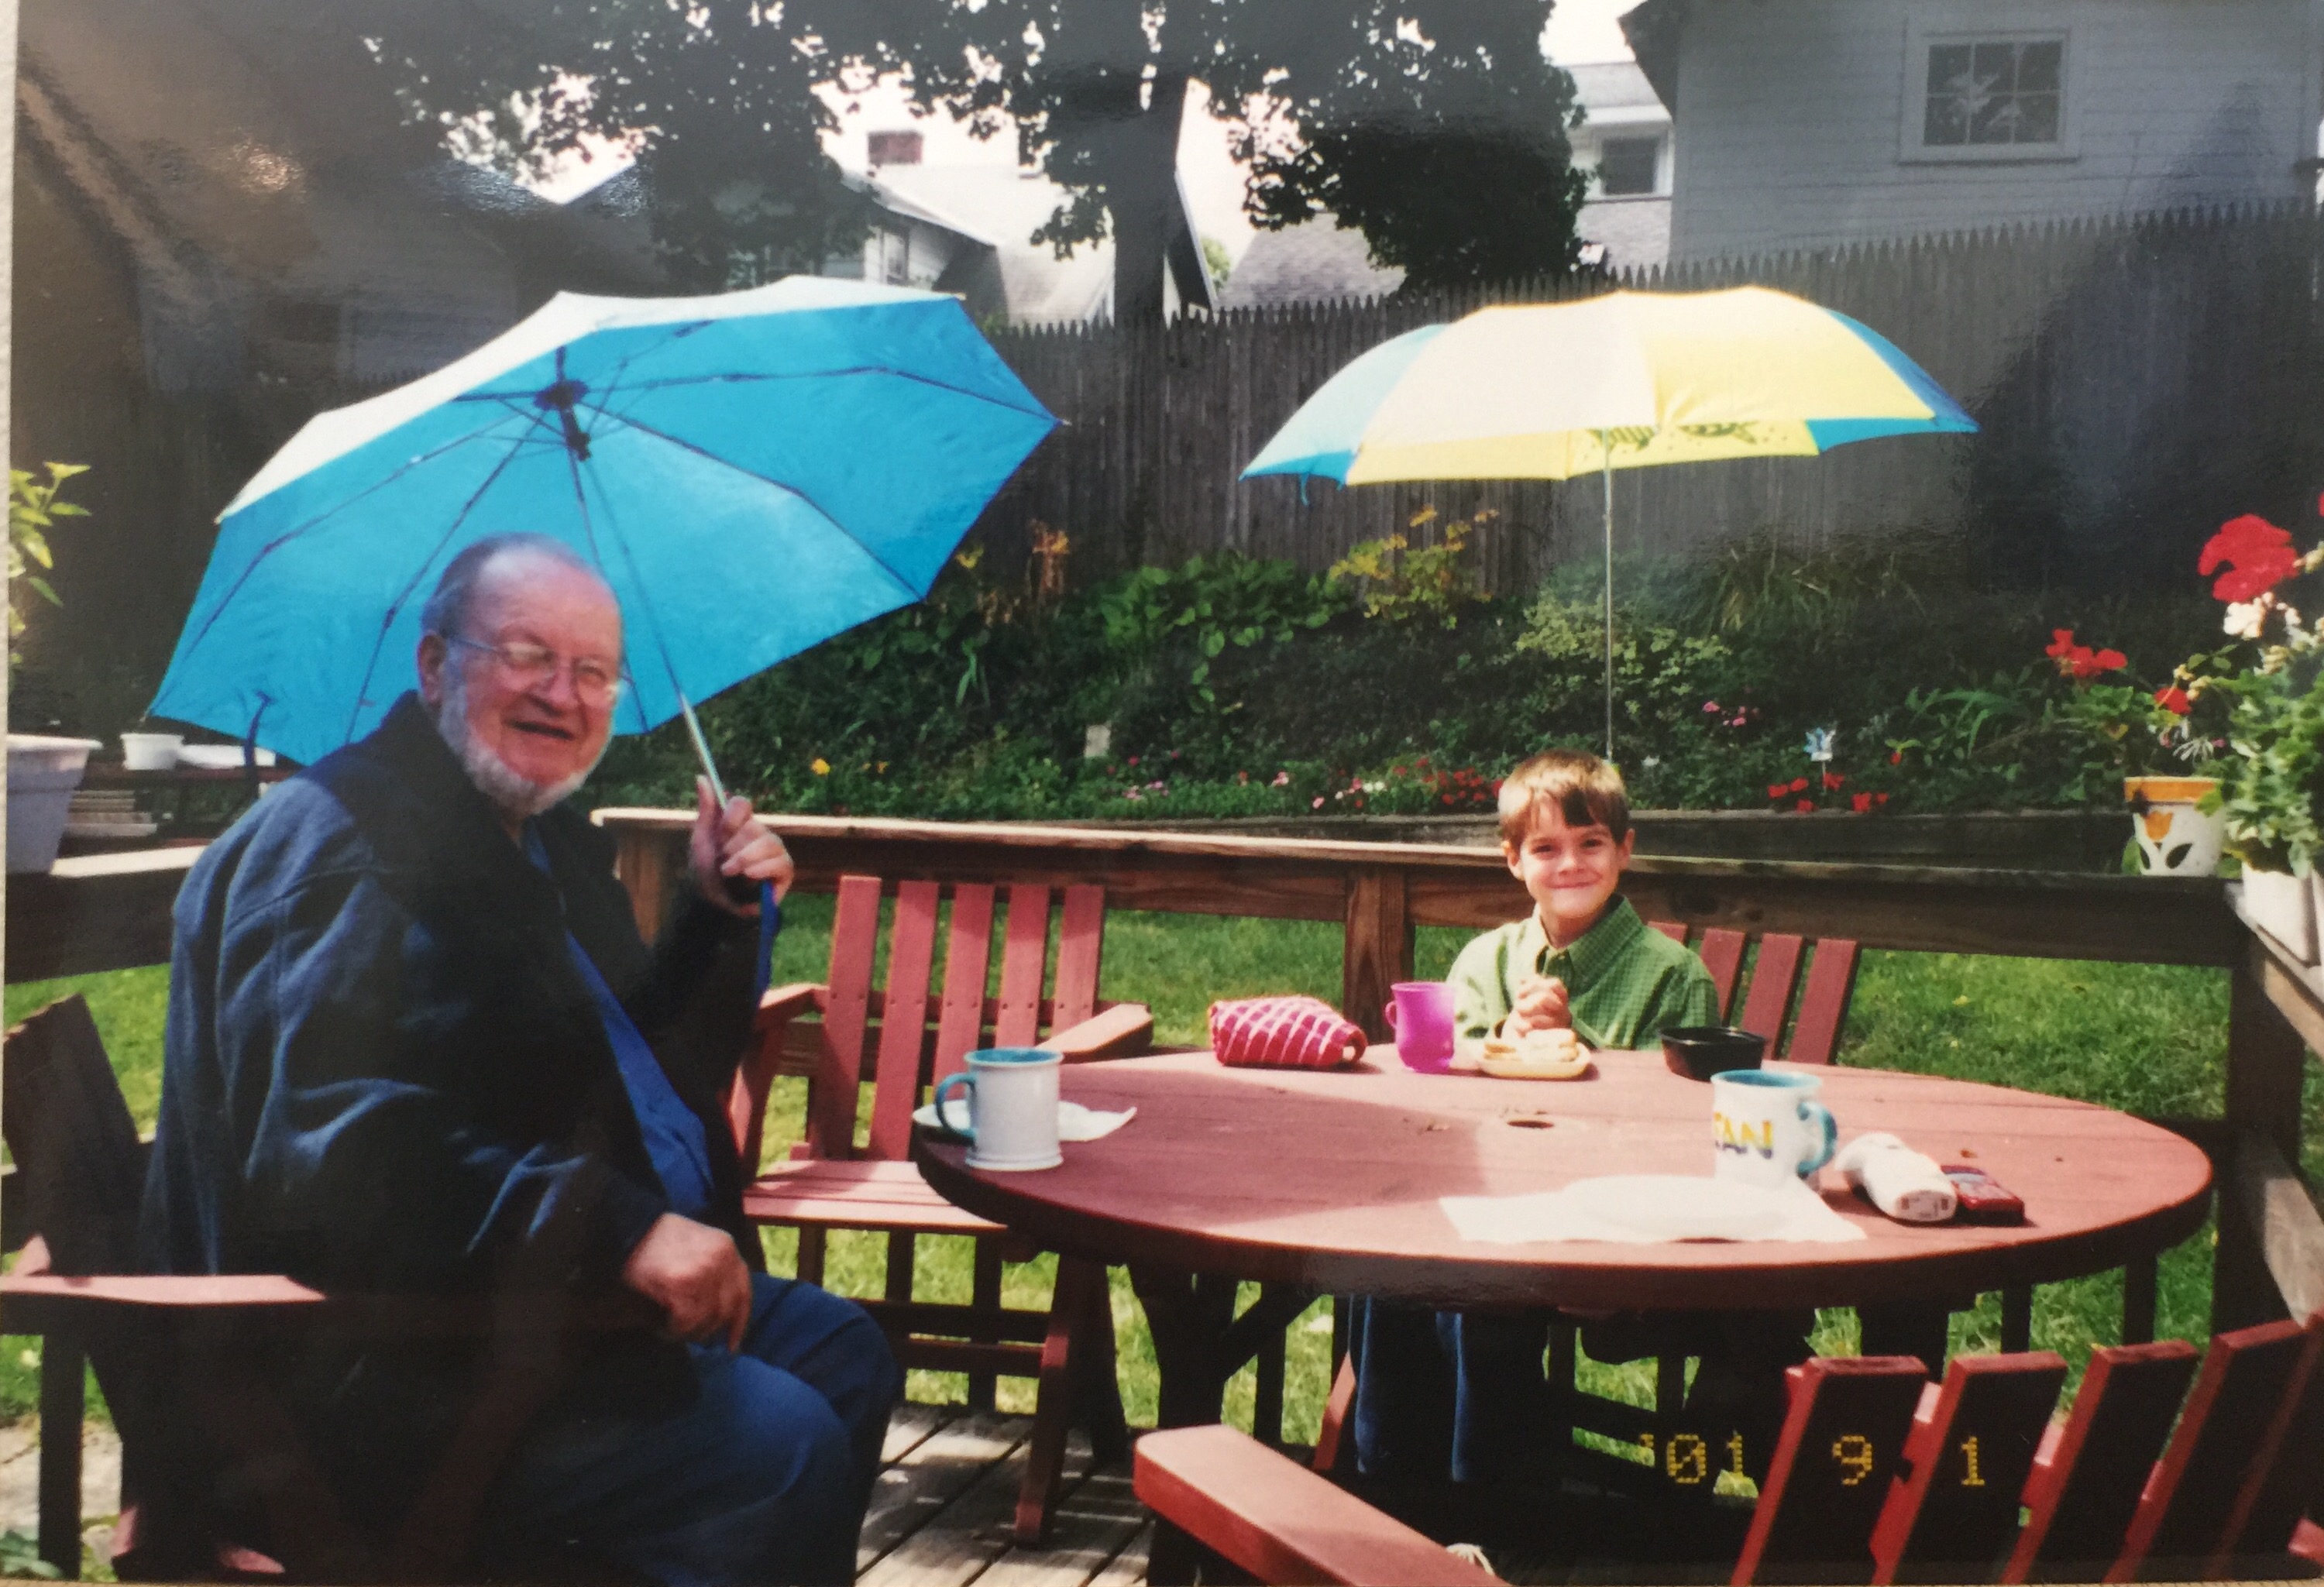 Spending time with Grandpa while enjoying our new umbrellas!